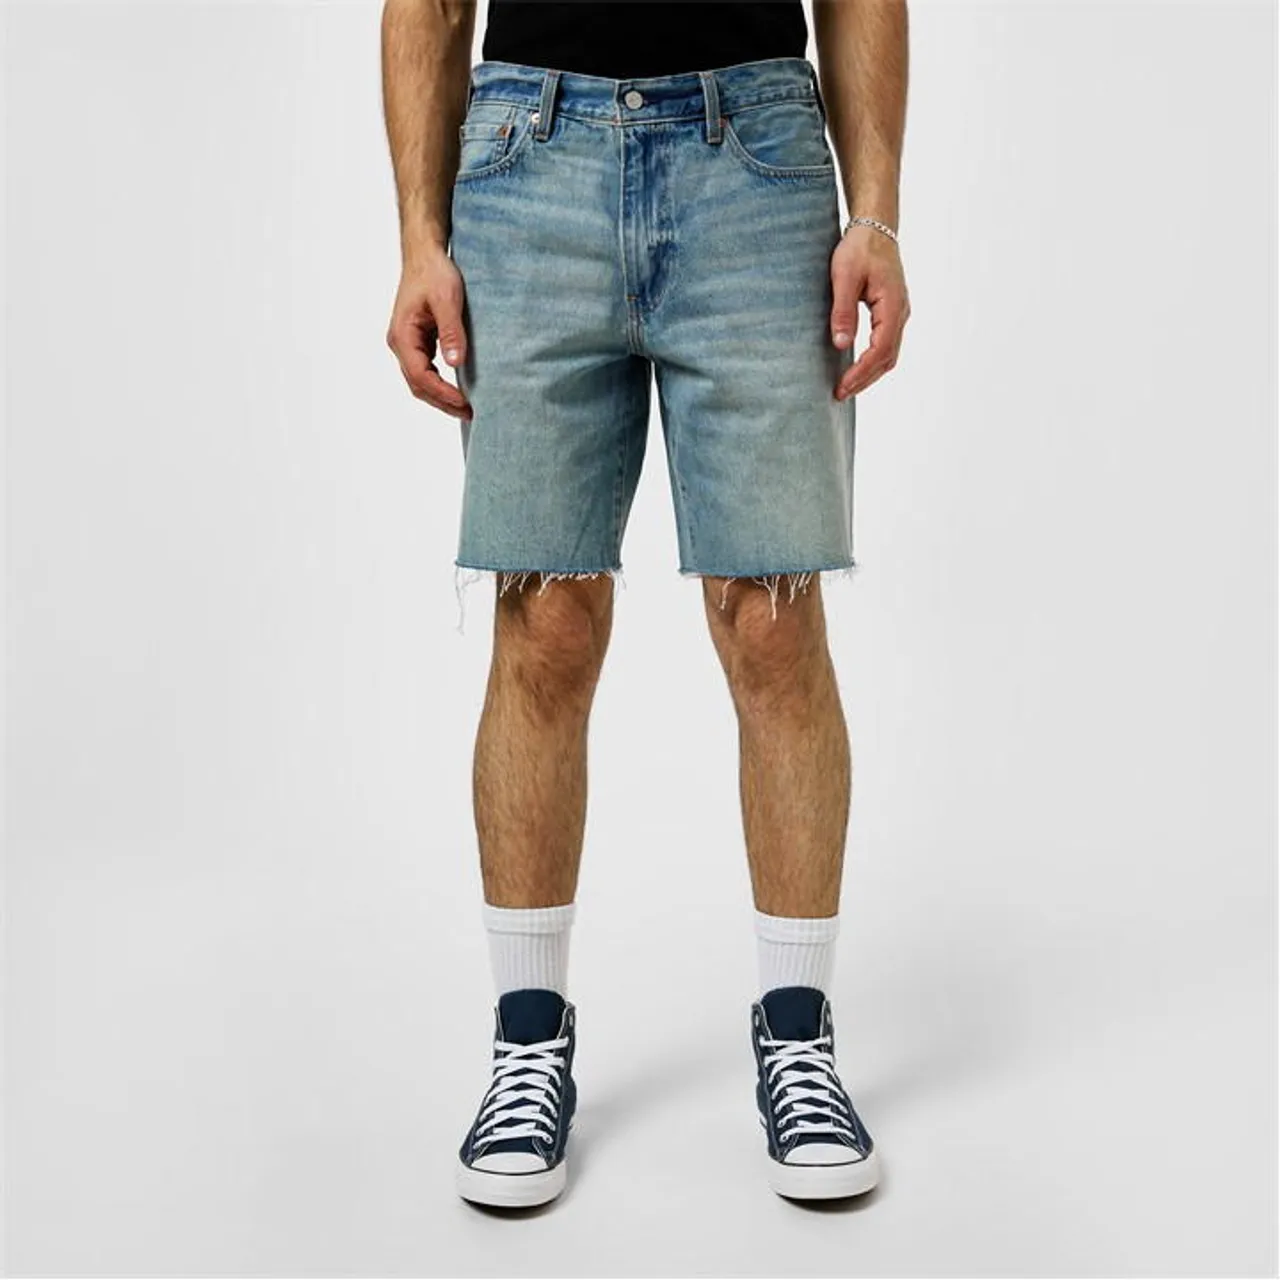 Levis Levis 468 Stay Loose Sn43 - Blue